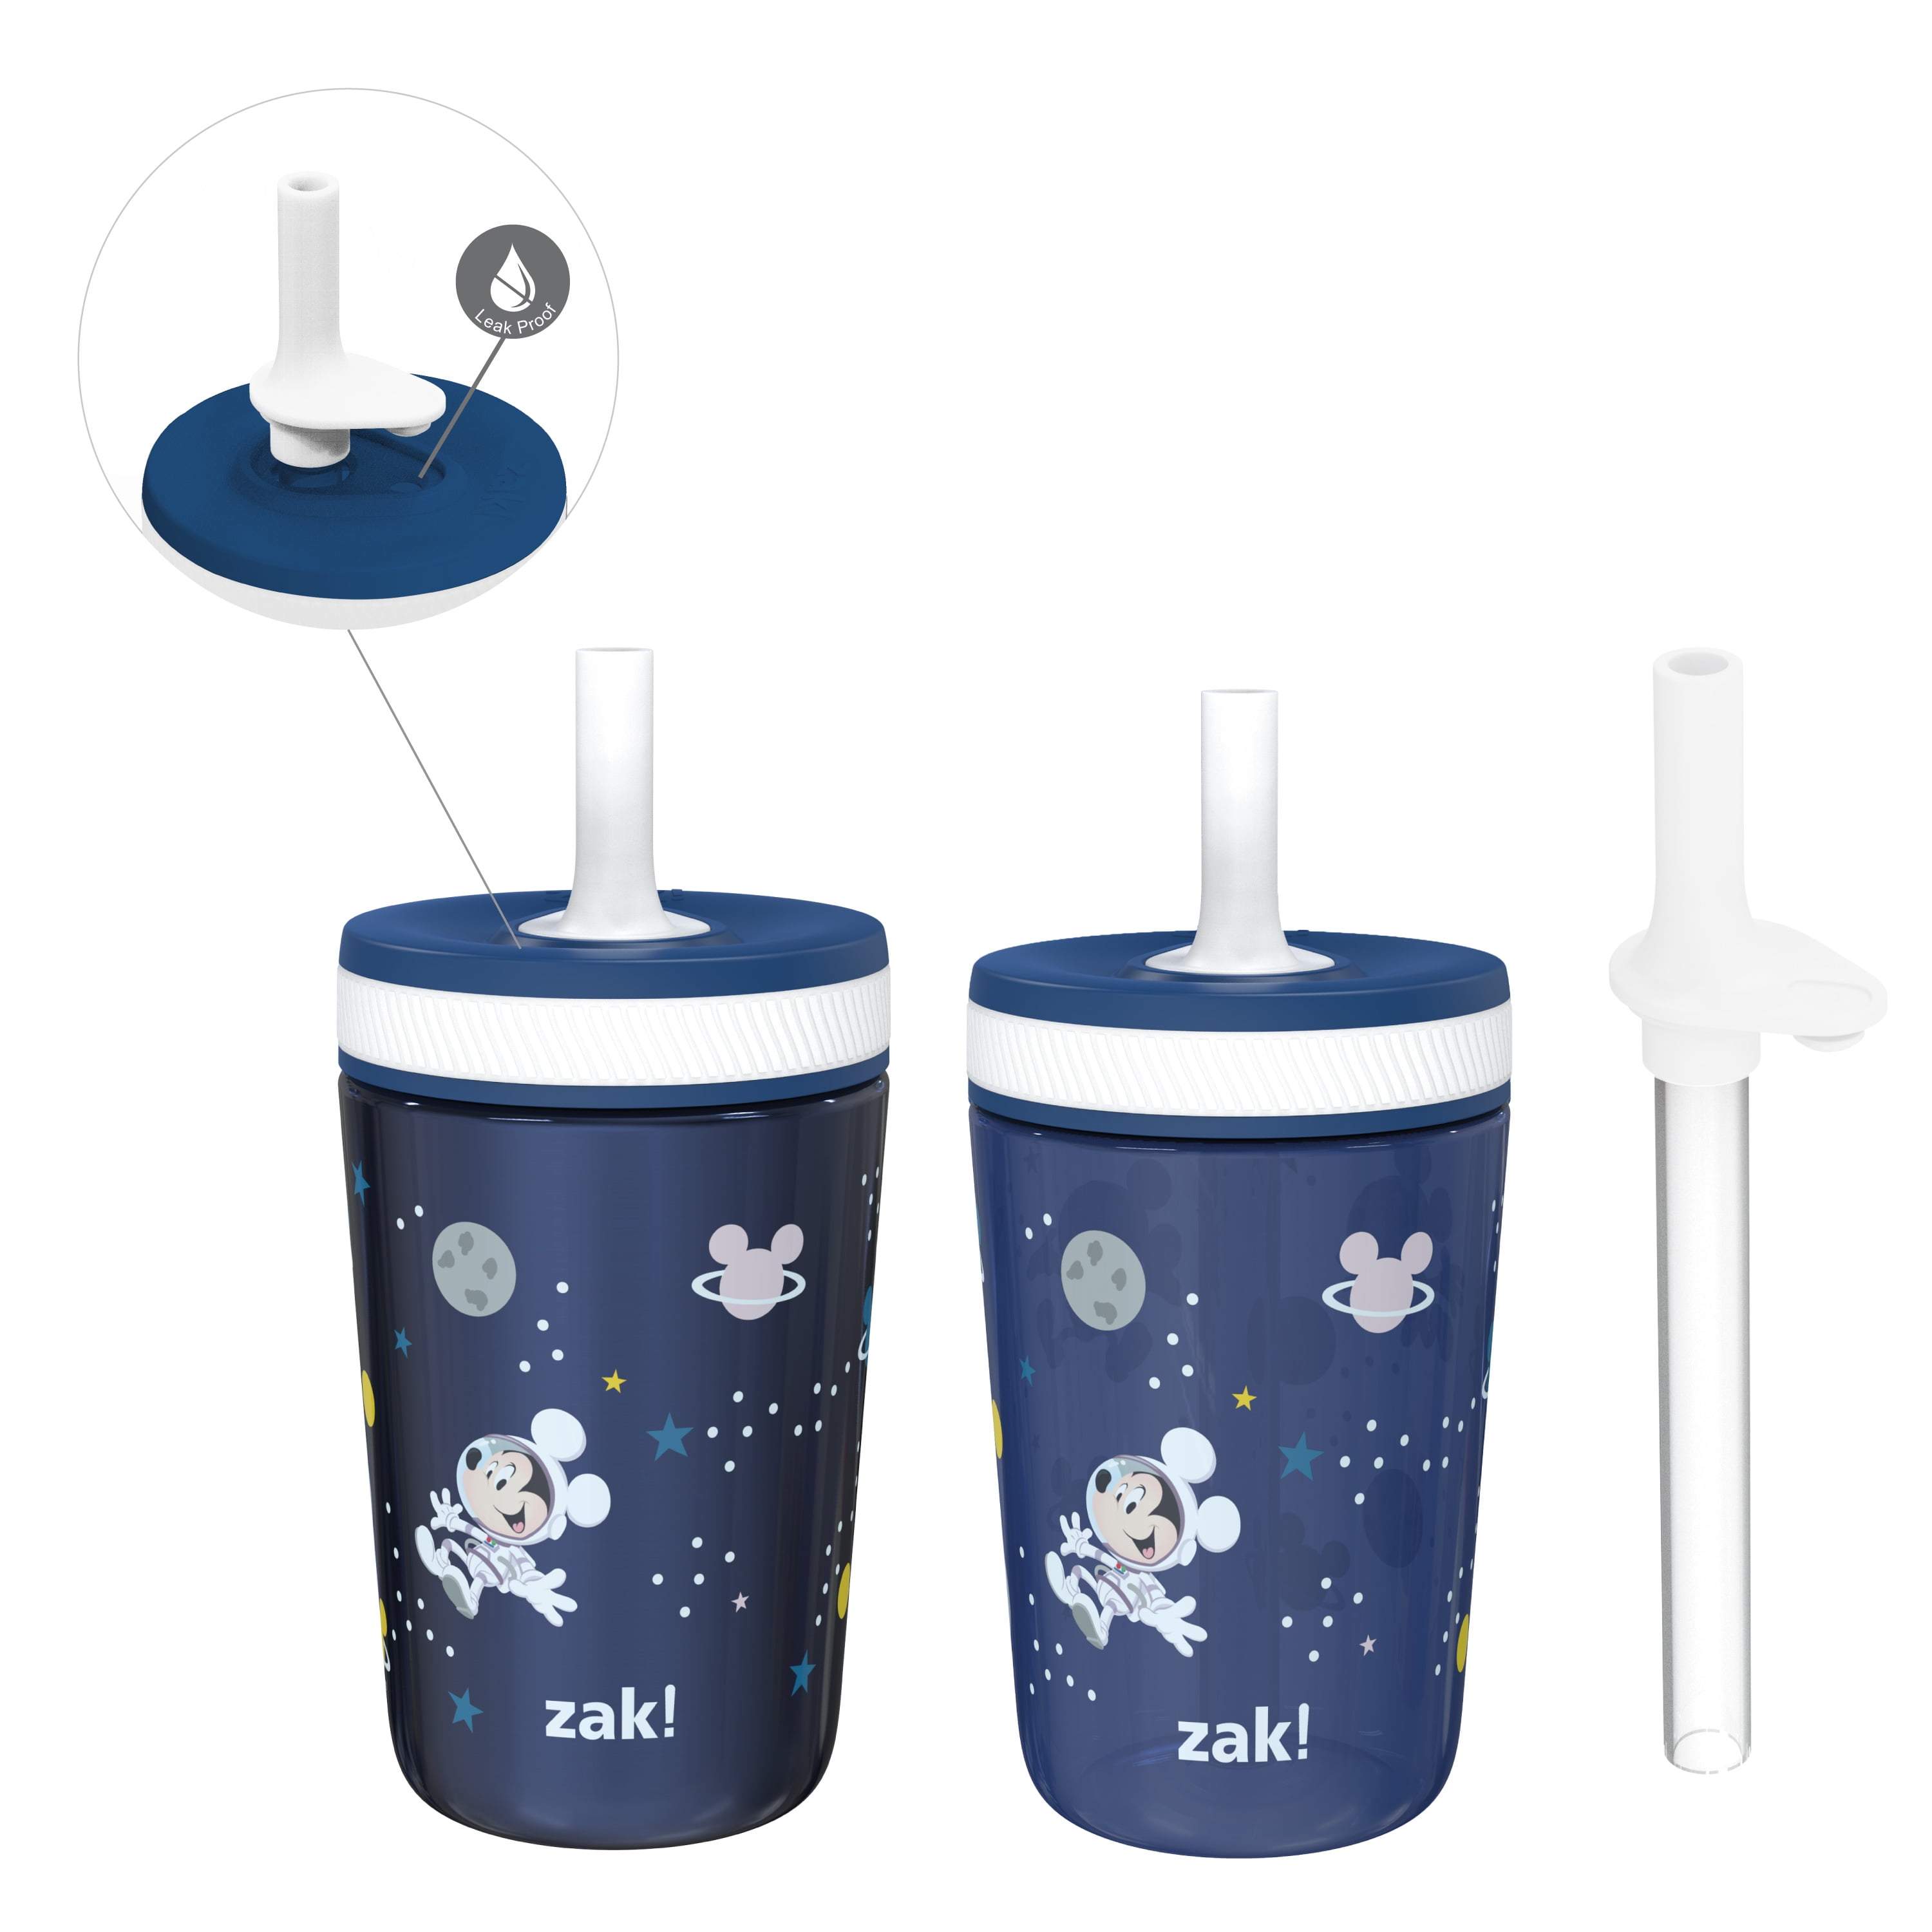 Zak Designs Bluey Nesting Tumbler Set Includes Durable Plastic Cups with Variety Artwork, Fun Drinkware Is Perfect for Kids (14.5 oz, 4-Pack, Non-BPA)